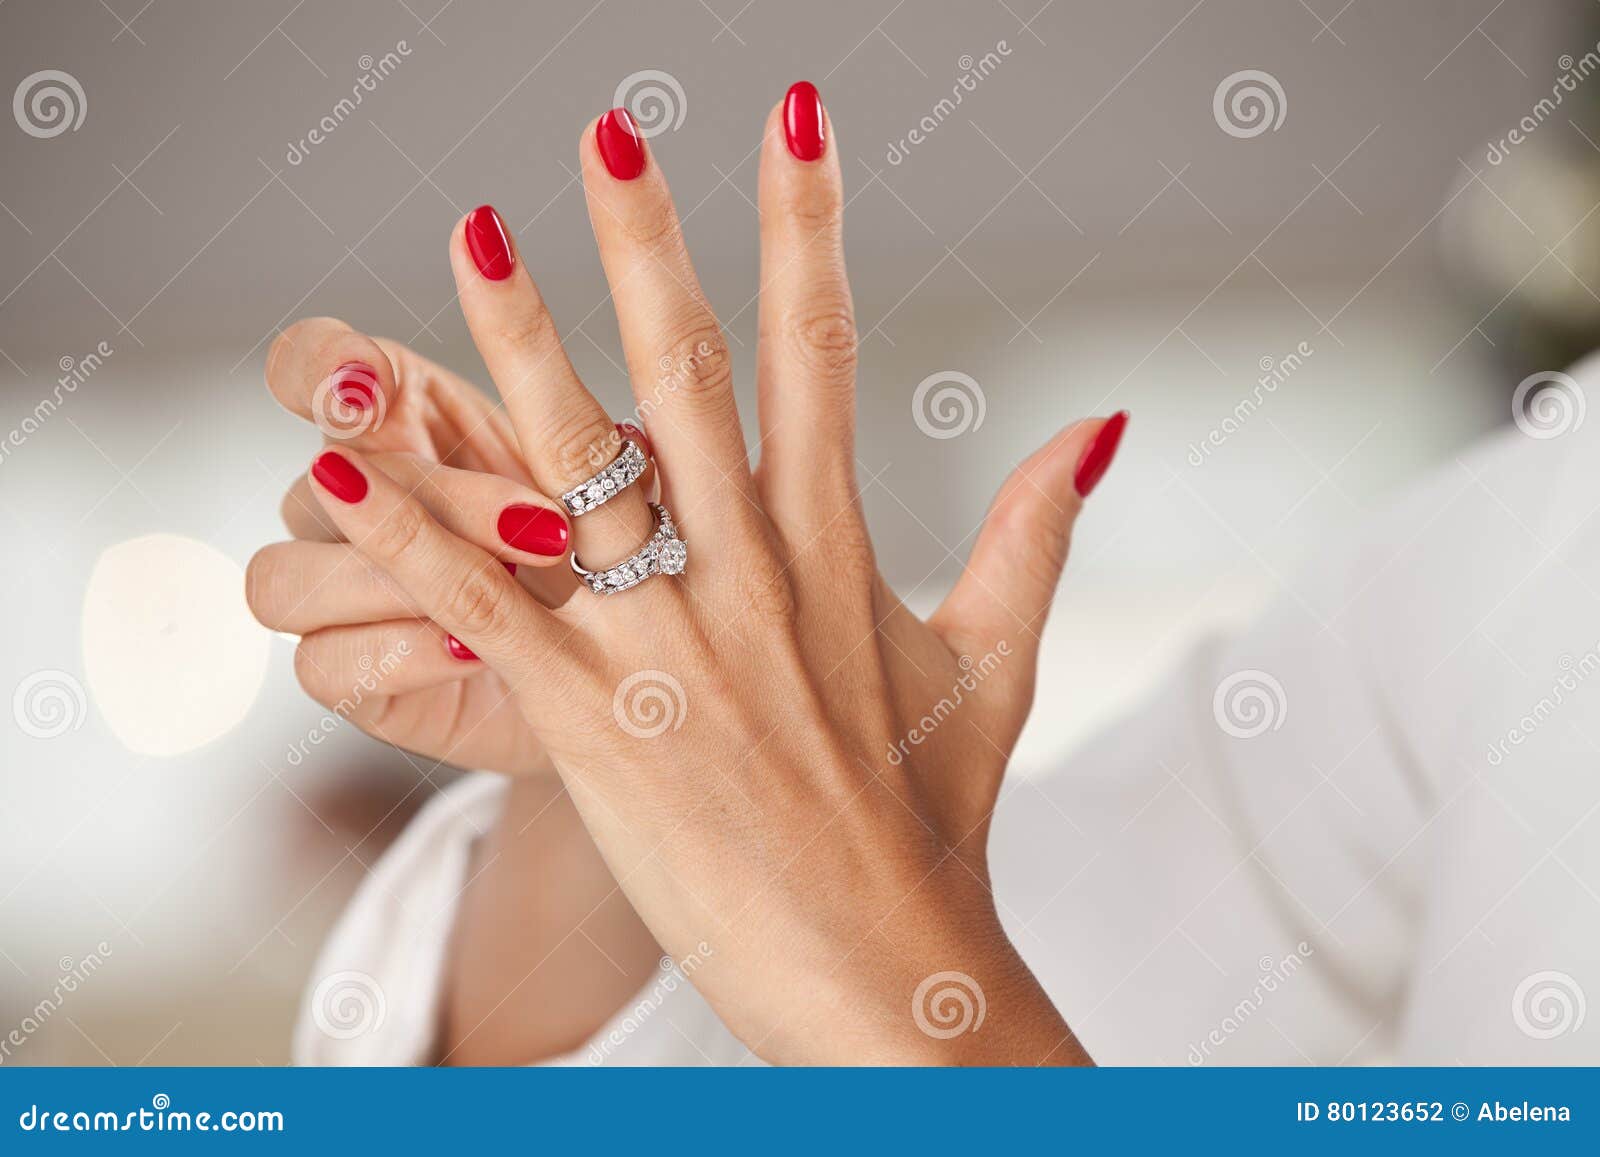 16,368 Beautiful Hands Red Nails Stock Photos - Free & Royalty ...